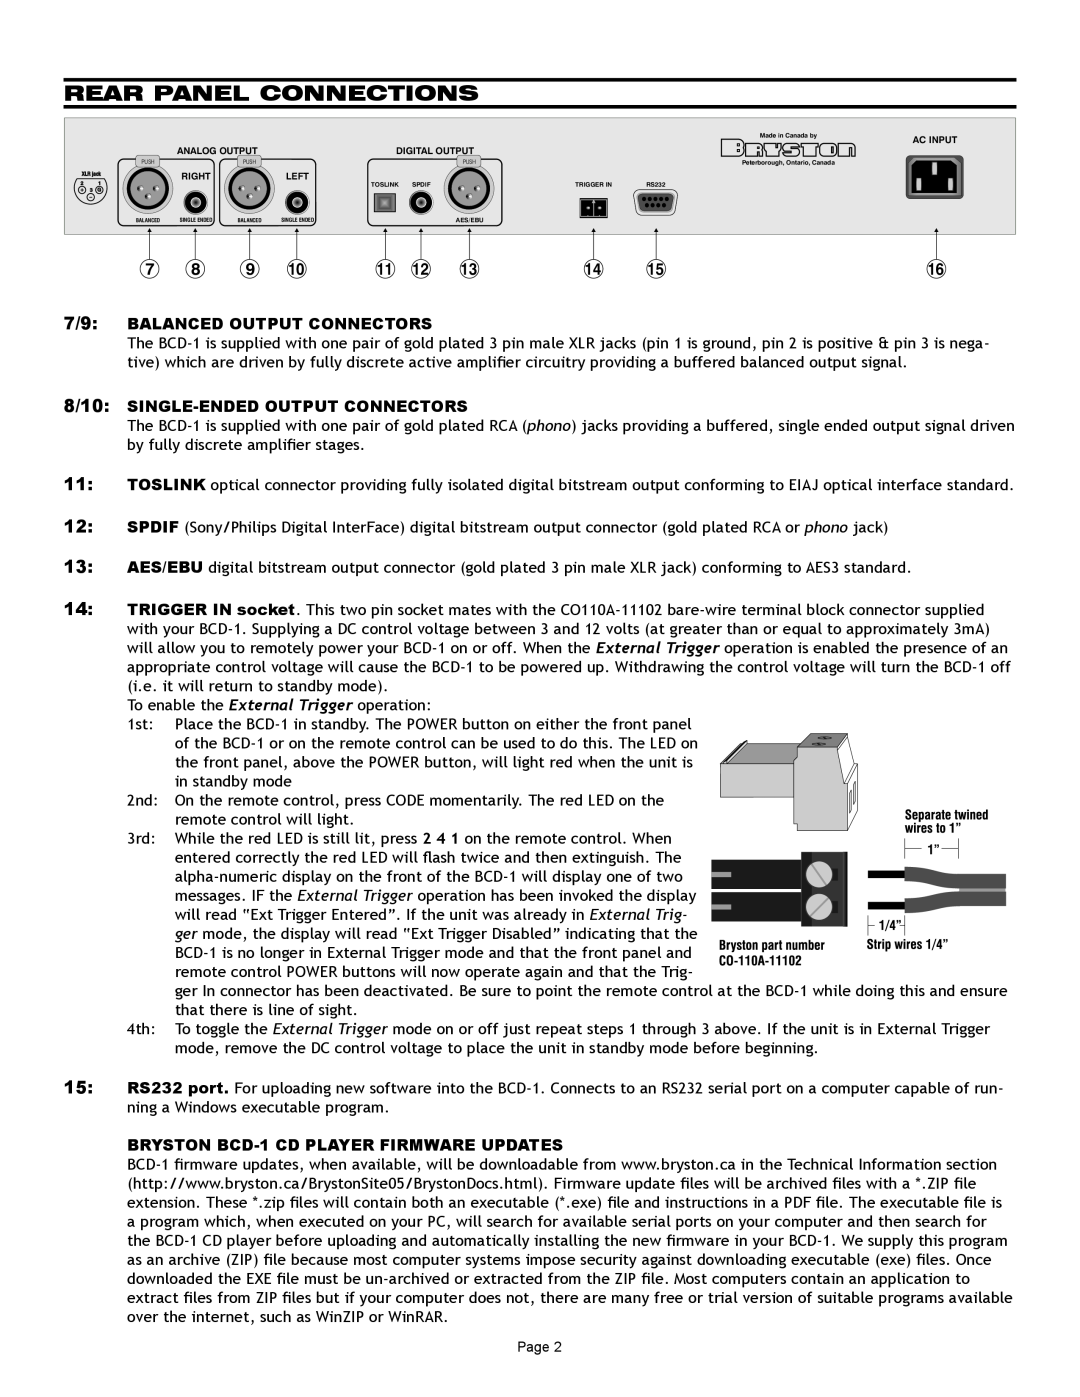 Bryston BCD-1 owner manual Rear Panel Connections, 7/9 BALANCED OUTPUT CONNECTORS, 8/10 SINGLE-ENDEDOUTPUT CONNECTORS 